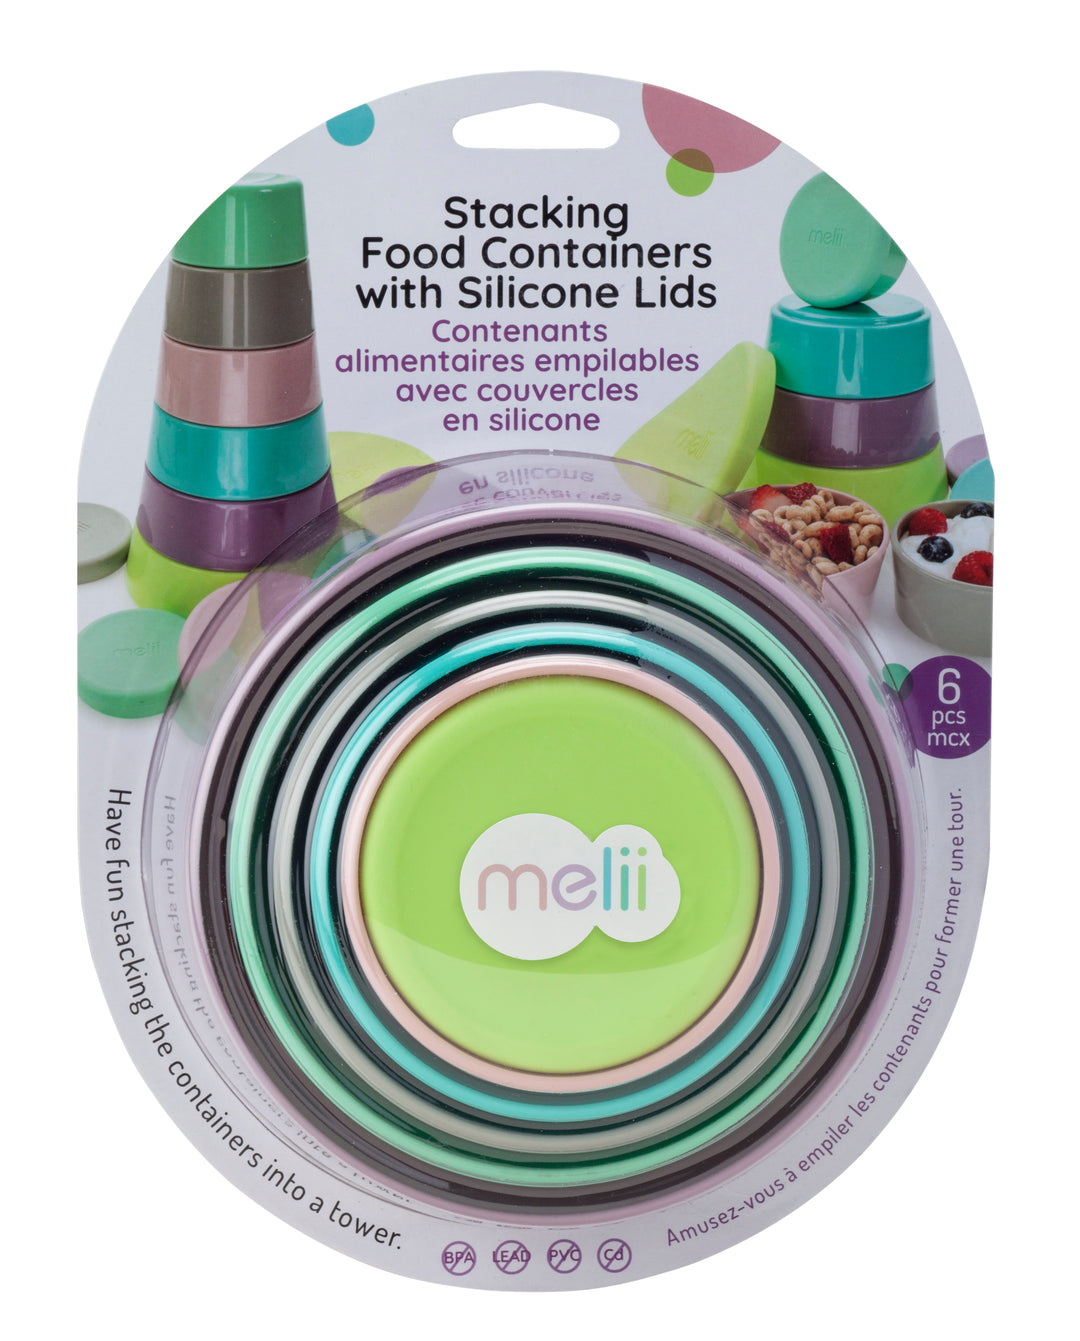 Stackable Food Storage - Wild Child Hat Co by Littoes